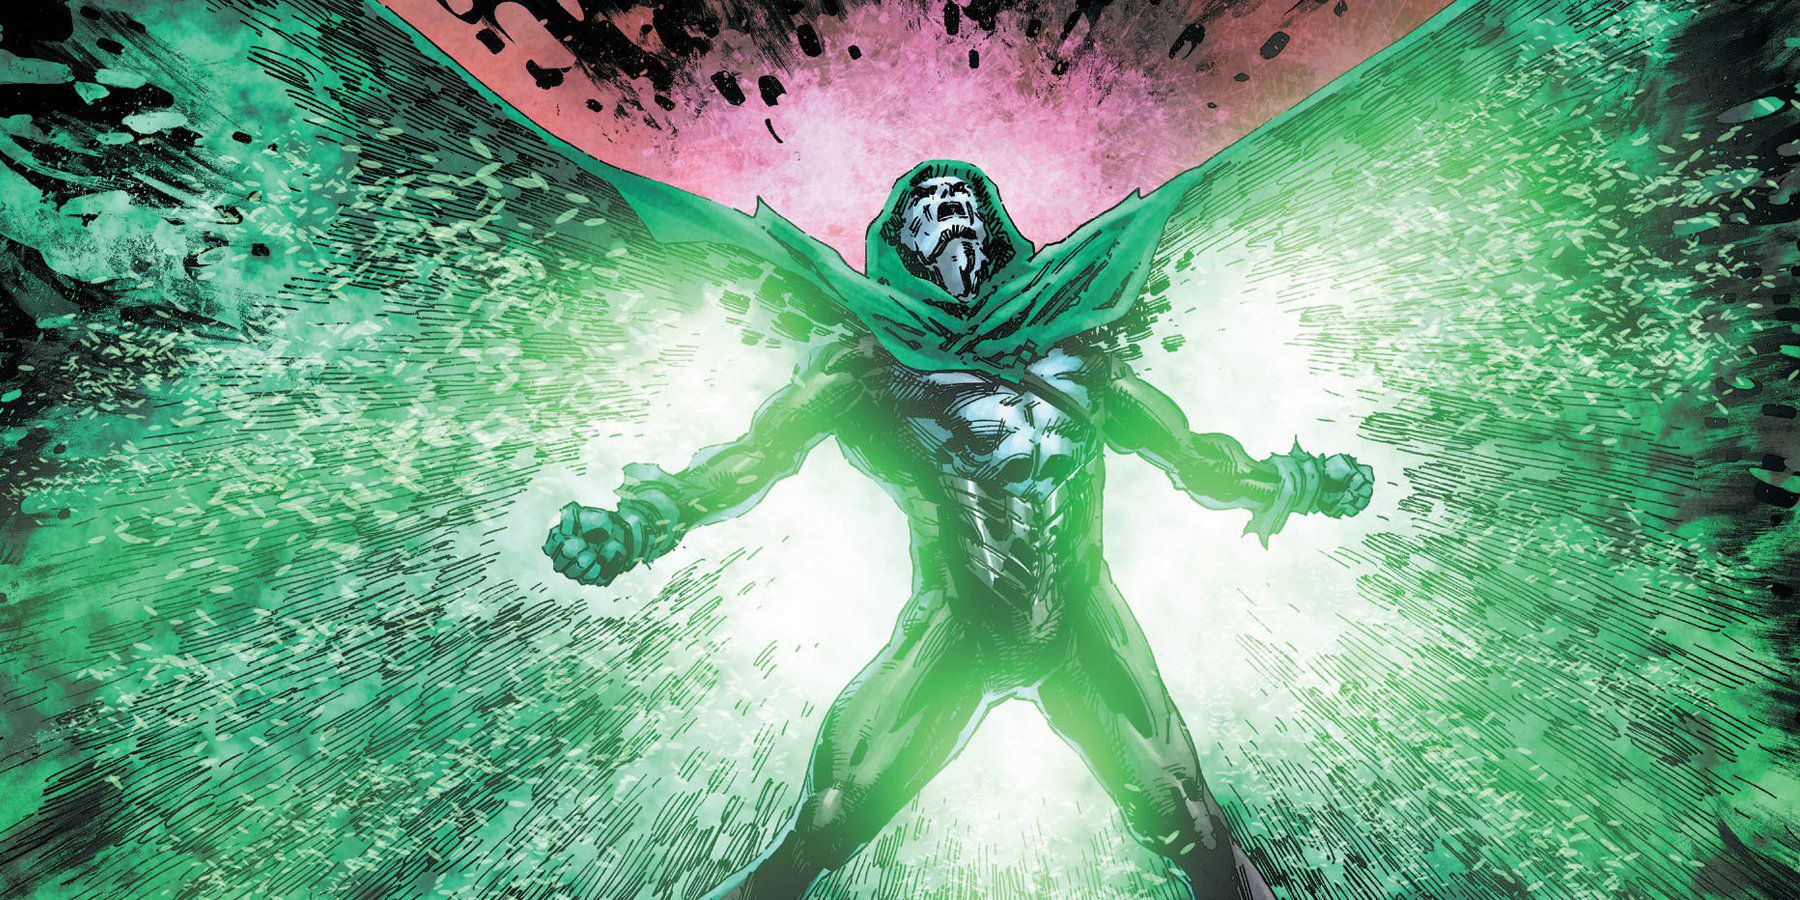 What Makes The Spectre One of DC’s Most Powerful Heroes